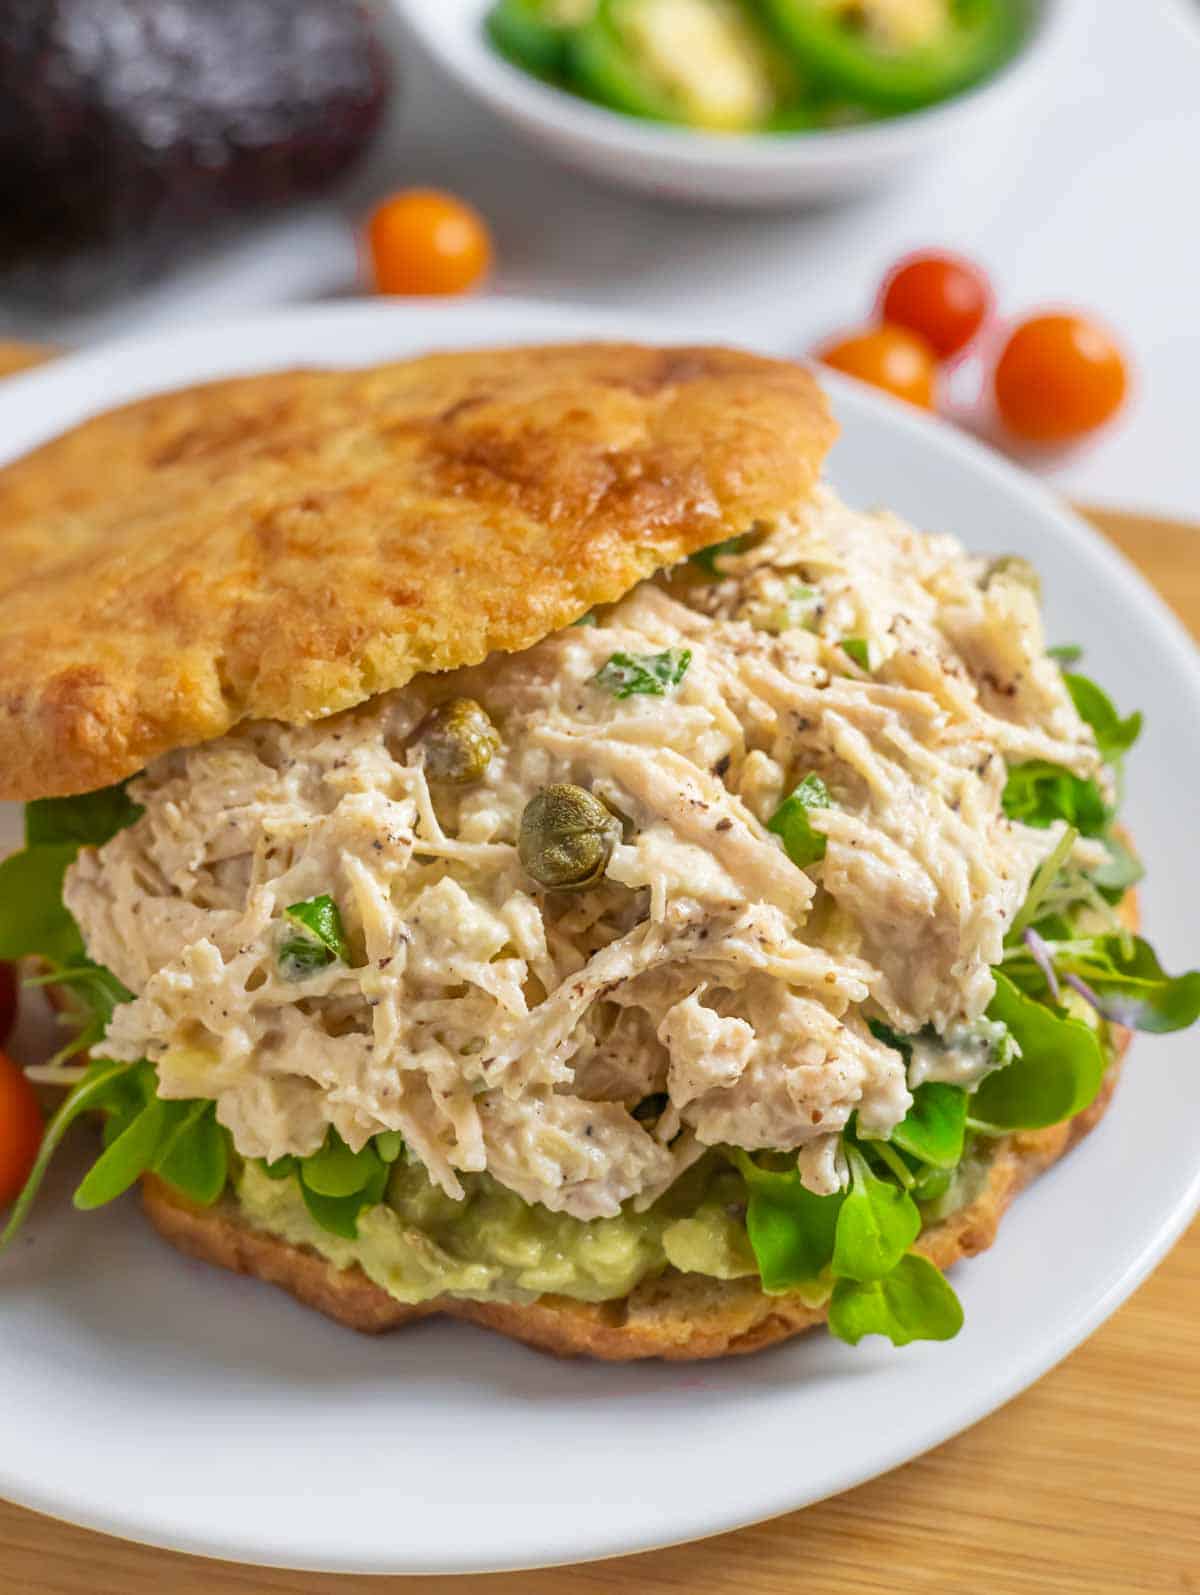 Spicy chicken salad on a sandwich thin with sprouts and avocado.